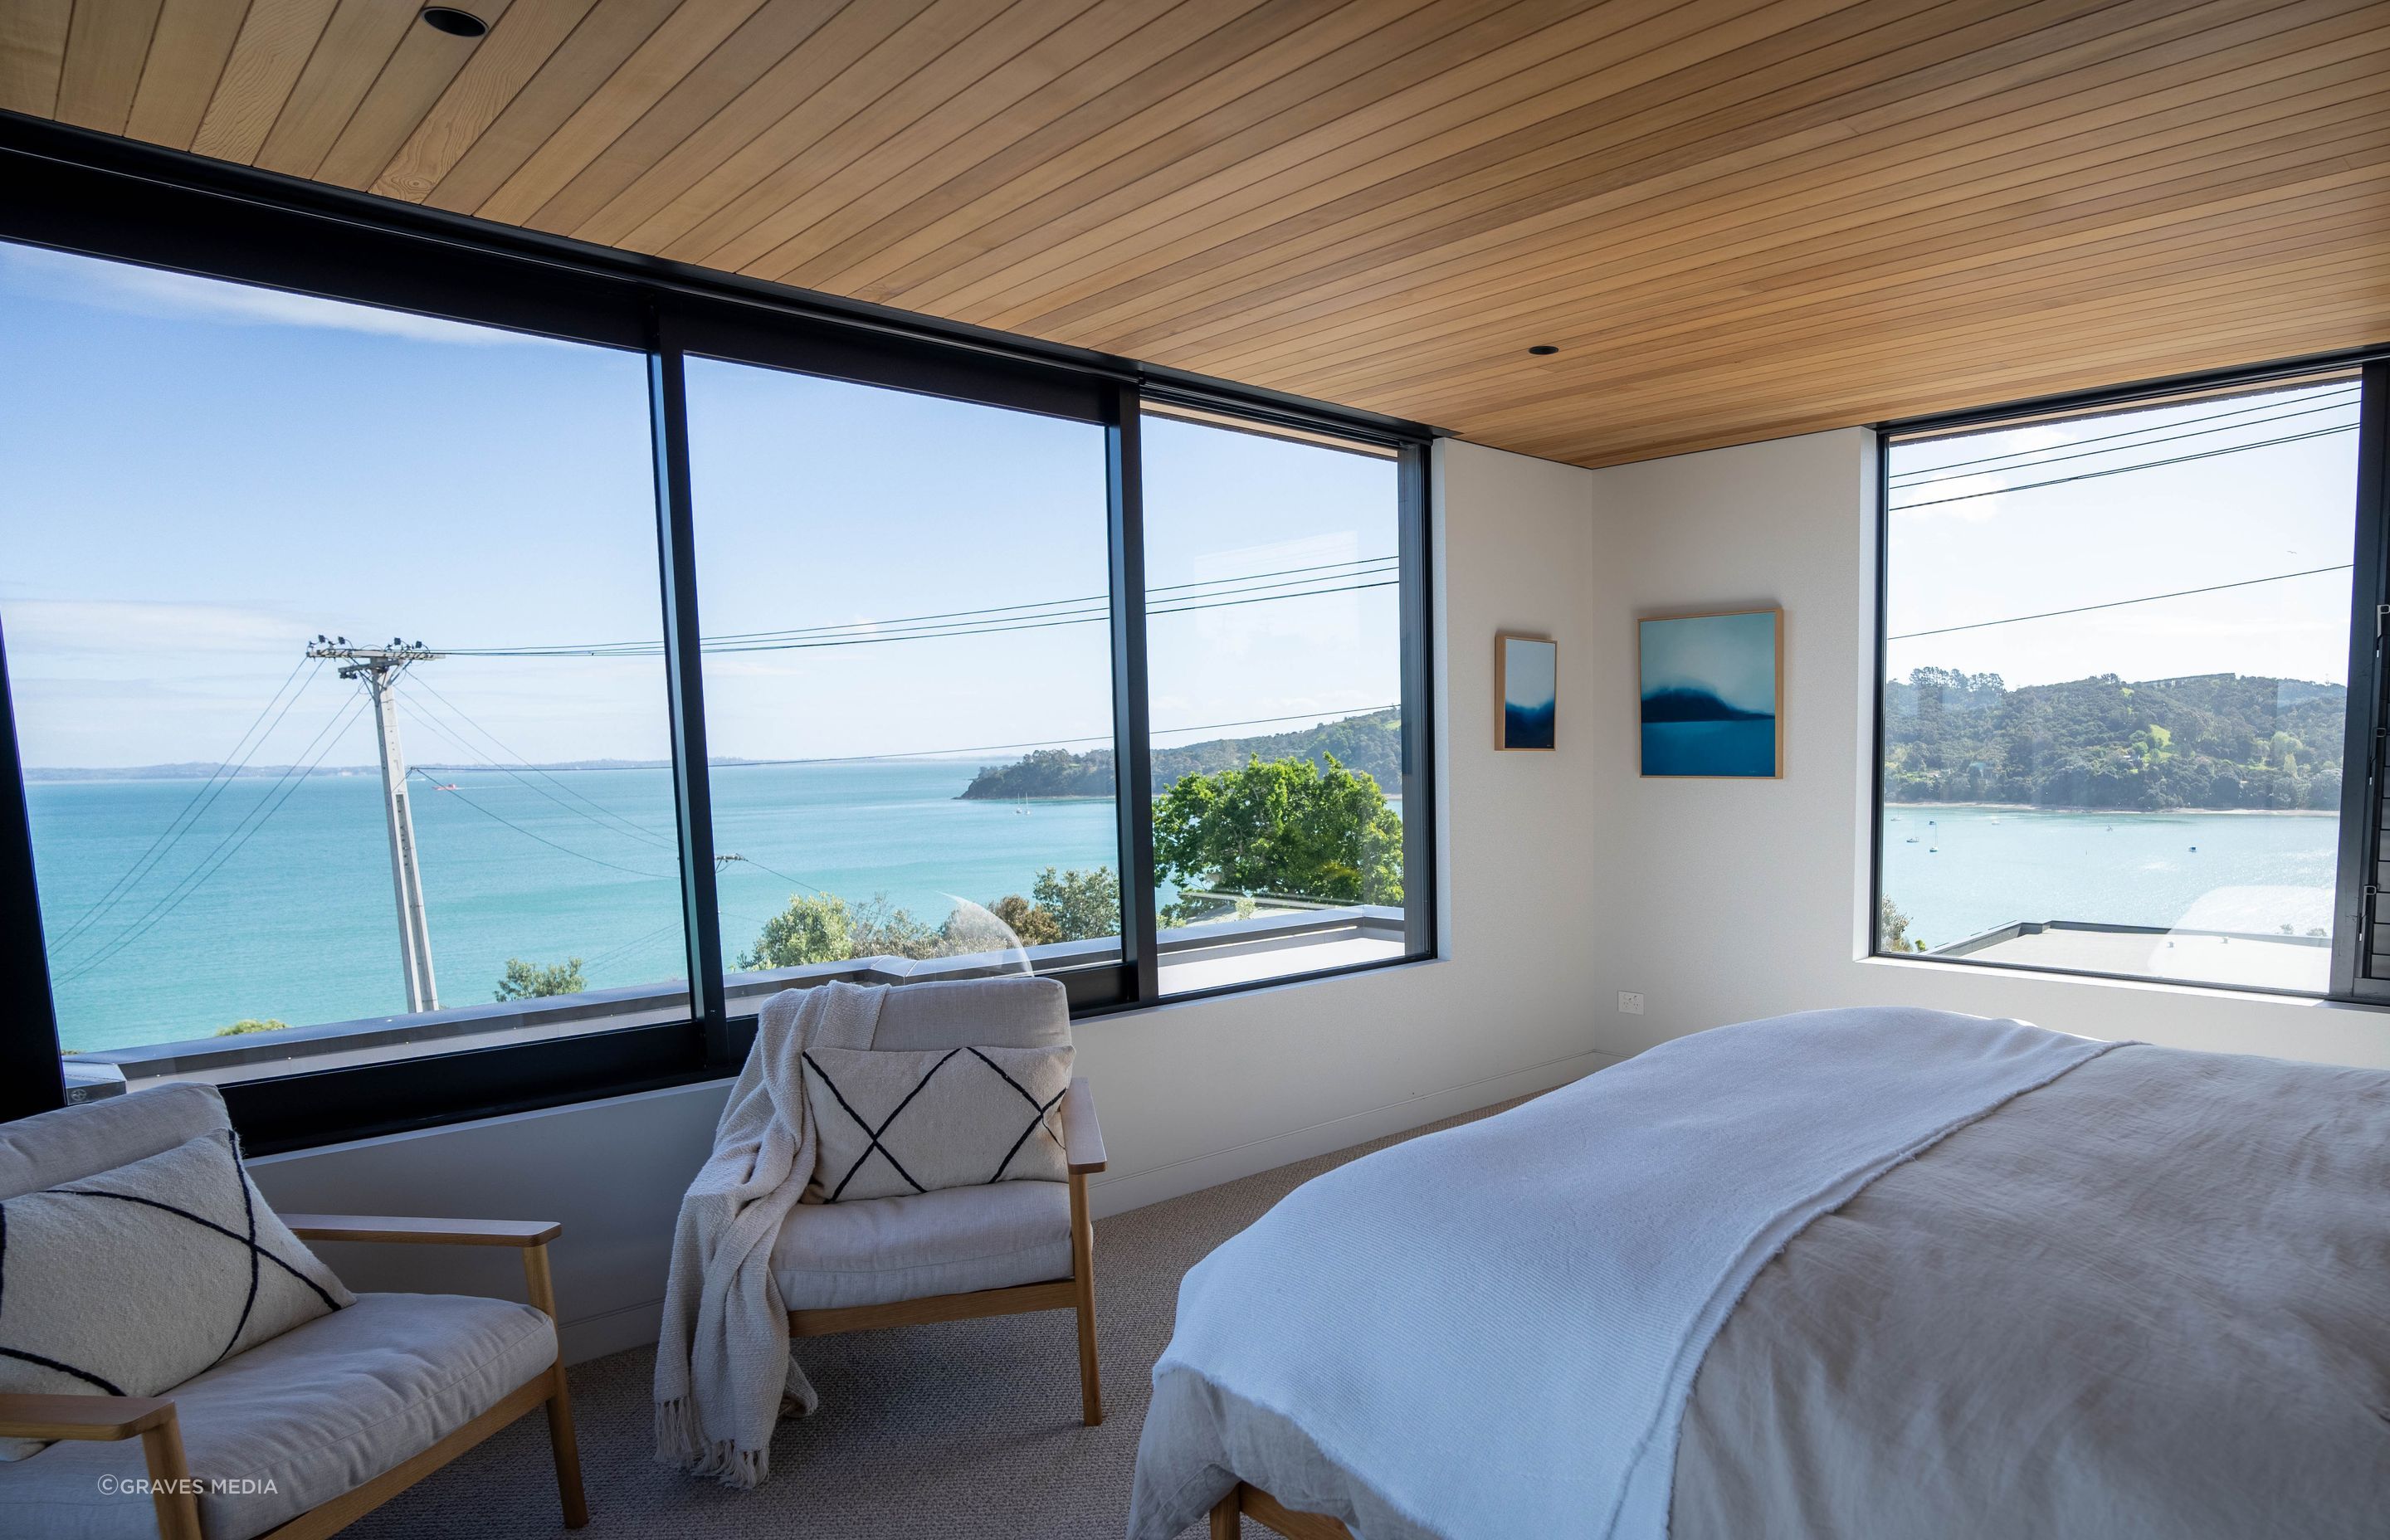  Large sliding windows welcome in the ocean breeze and furniture and textiles have been carefully selected to complement the cedar sarking and surrounding environment.